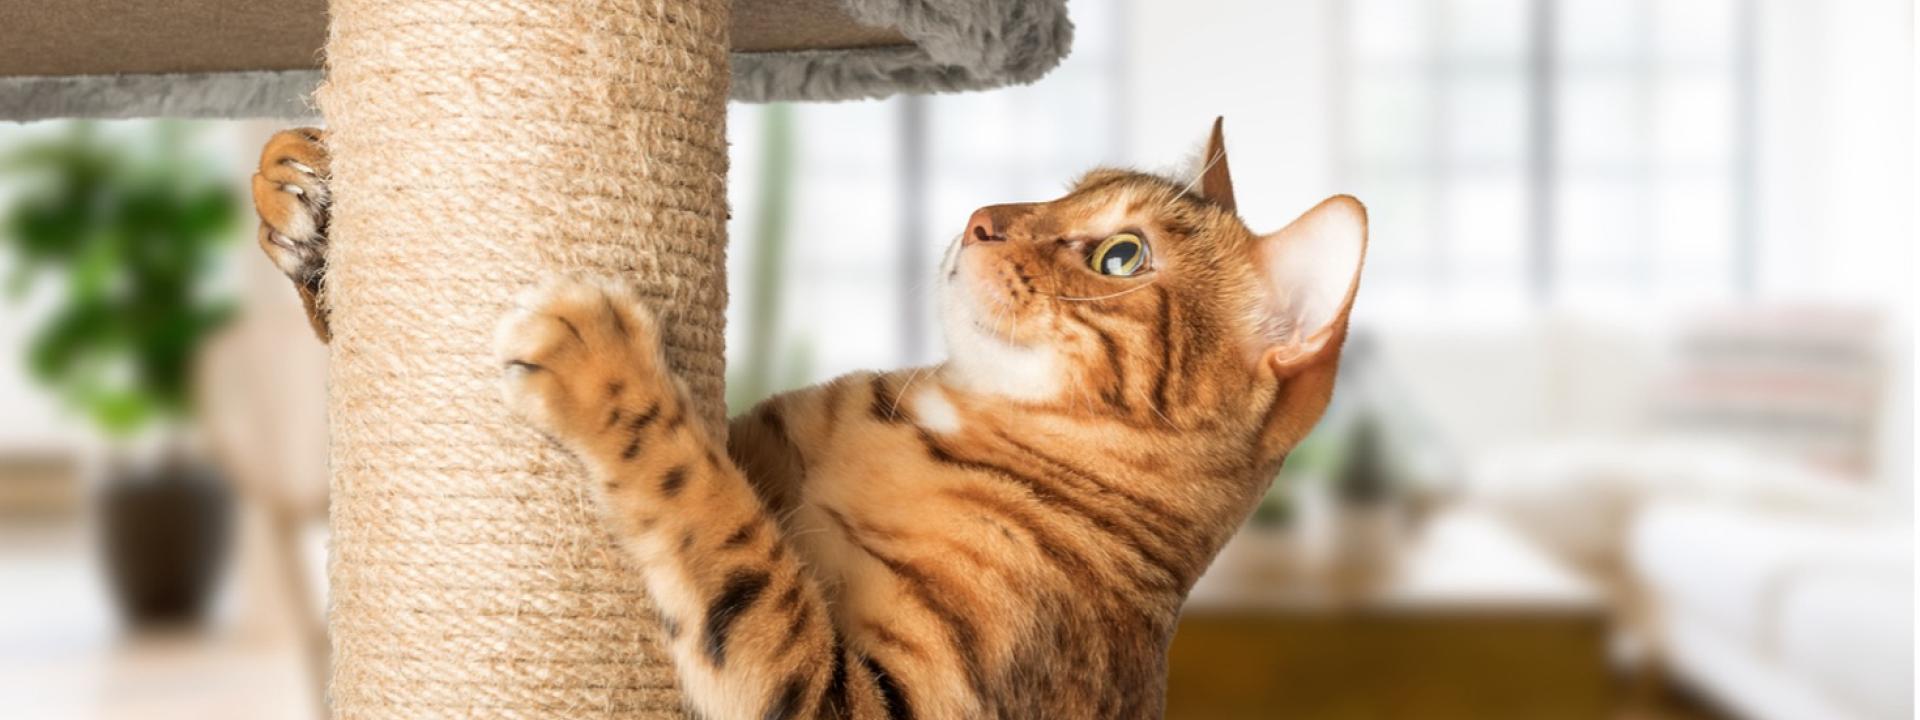 A cat climbing a cat tree, Gift Ideas for Cats - Interactive Toys, Cozy Beds, and Scratching Posts